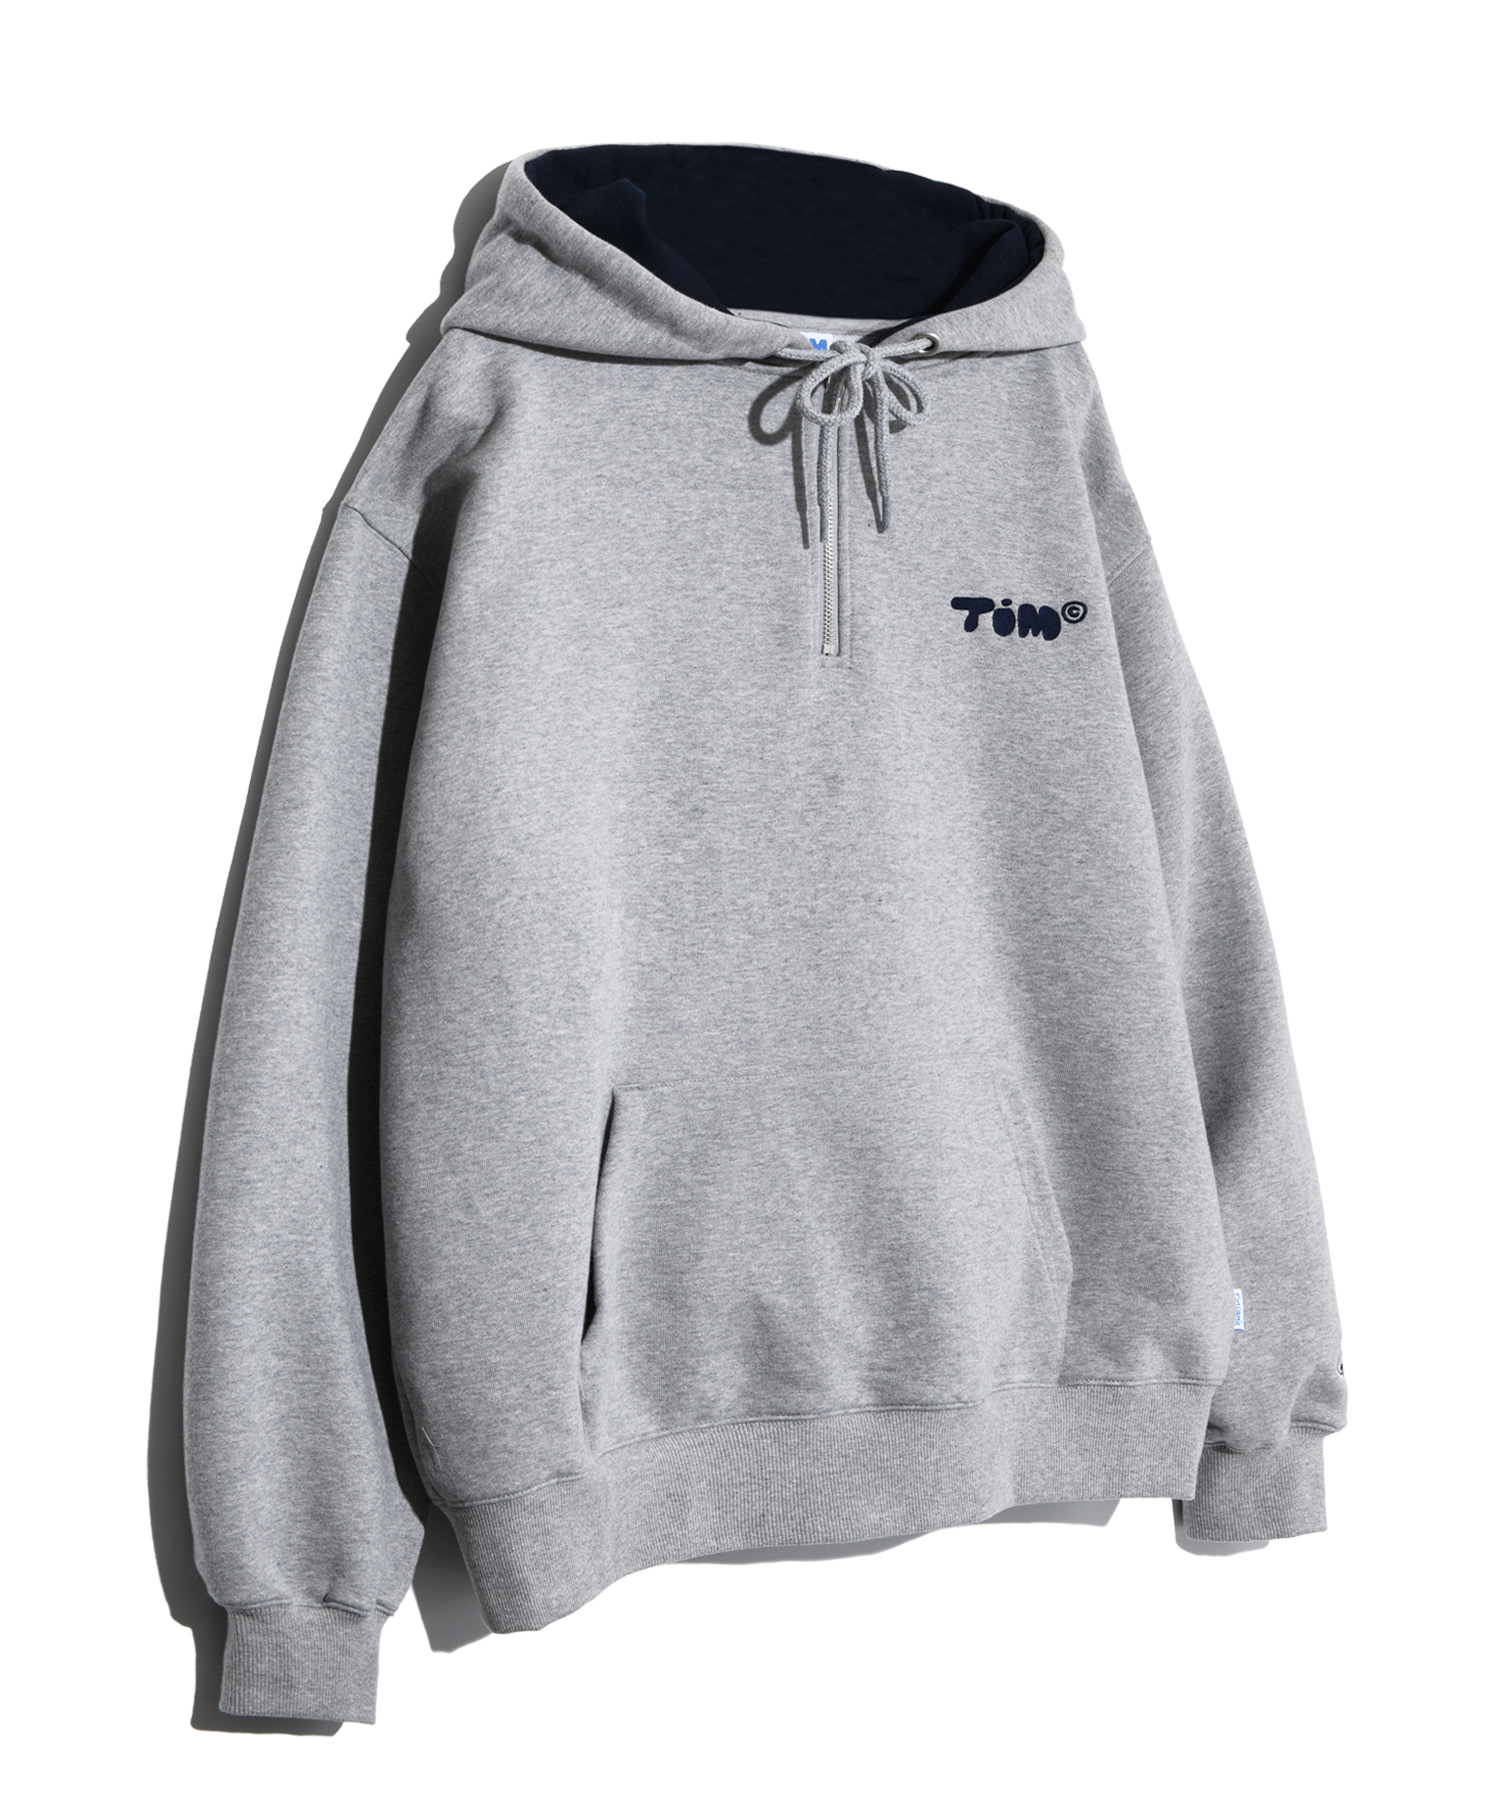 TIM ROUNDED TYPO HAIF ZIP UP GRAY